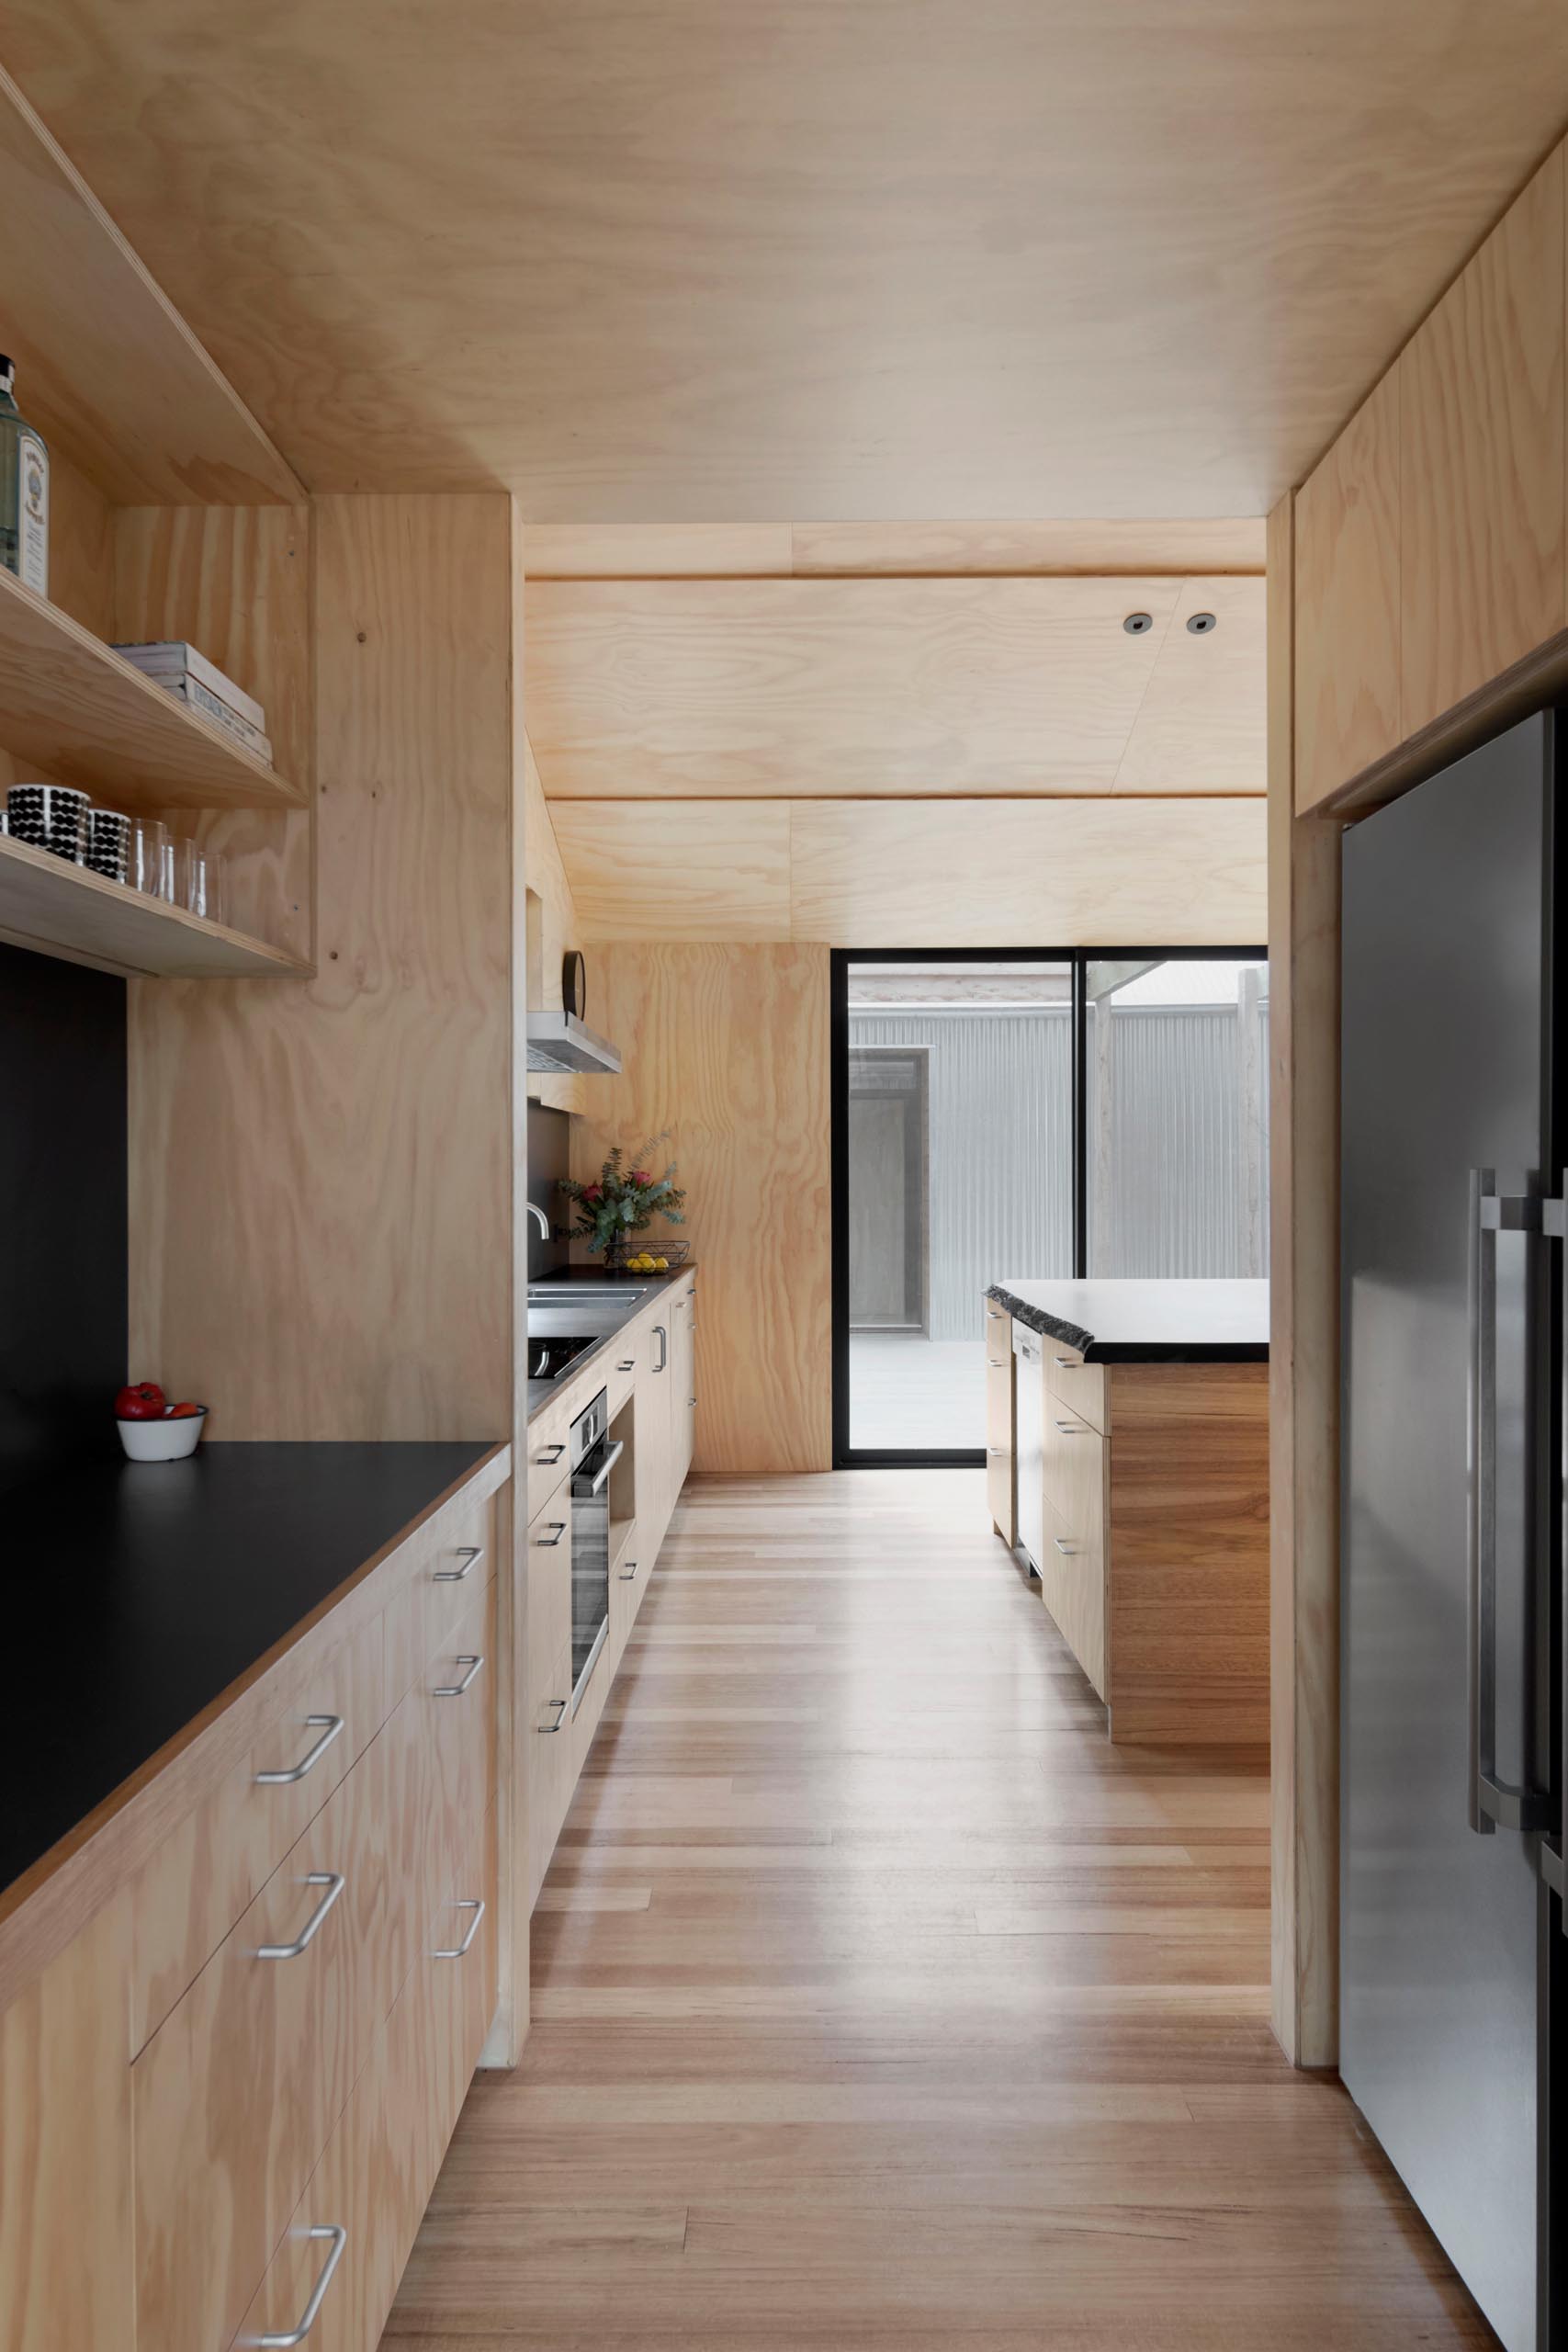 A modern plywood kitchen with a matte black countertop and backsplash, and separate pantry.